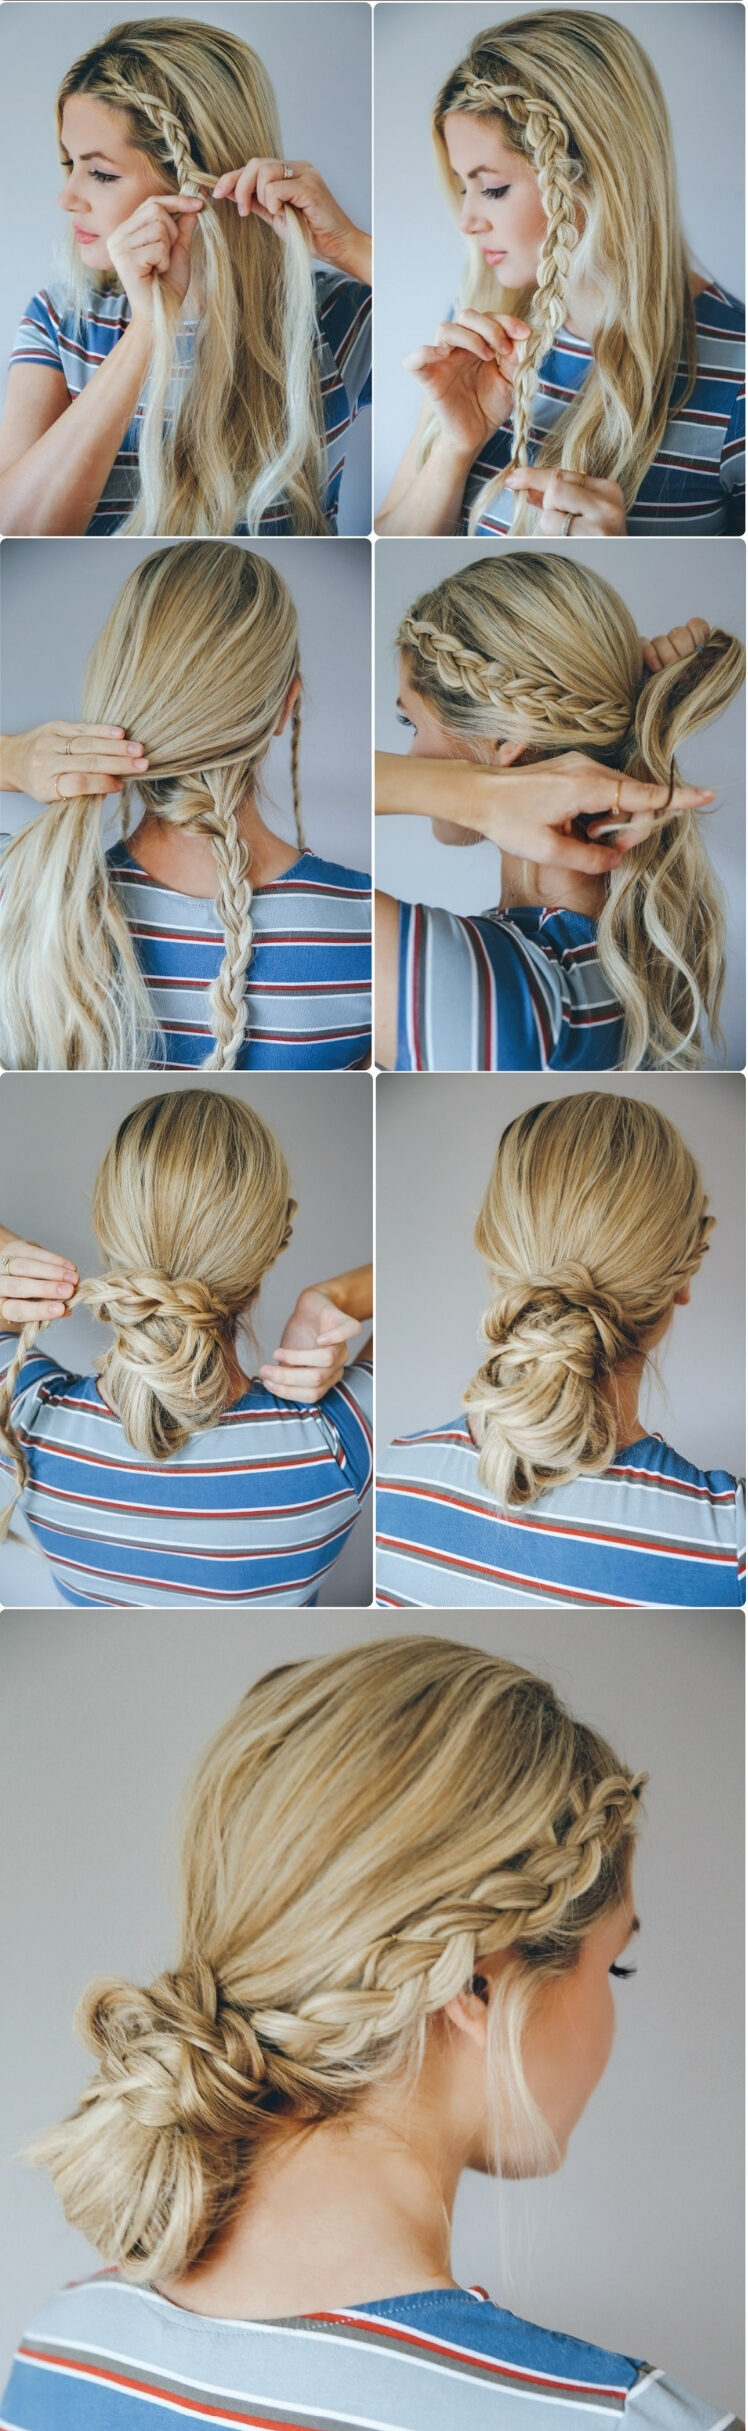 Seven step collage demonstrating how to perfect the double dutch braid to wear this summer to the beach